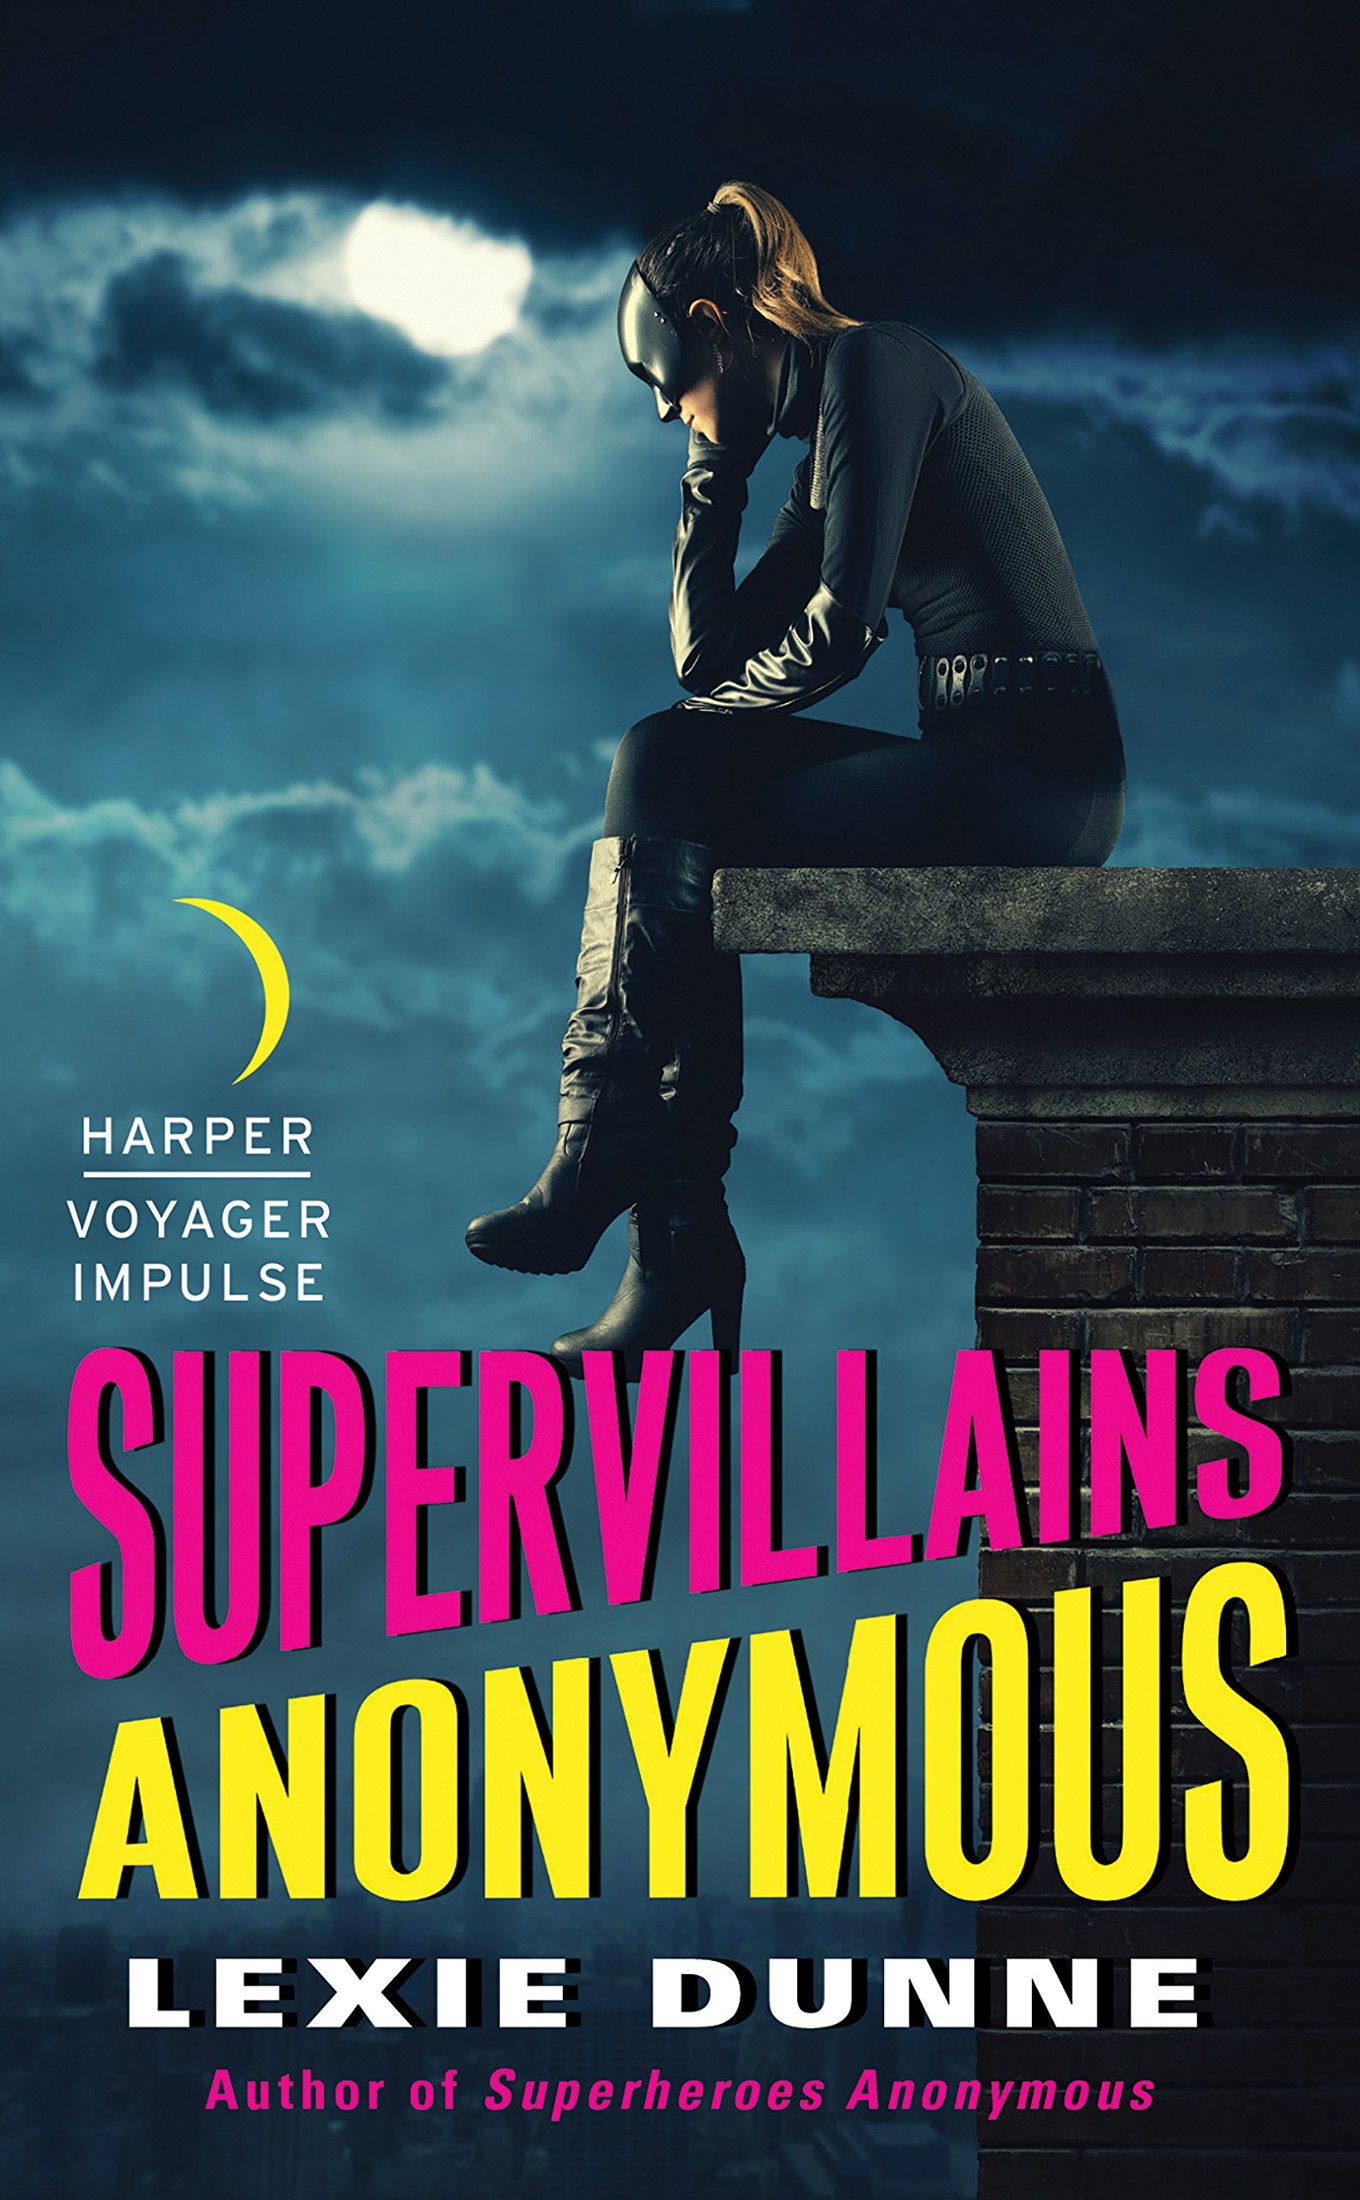 Supervillains Anonymous (Superheroes Anonymous Book 2)